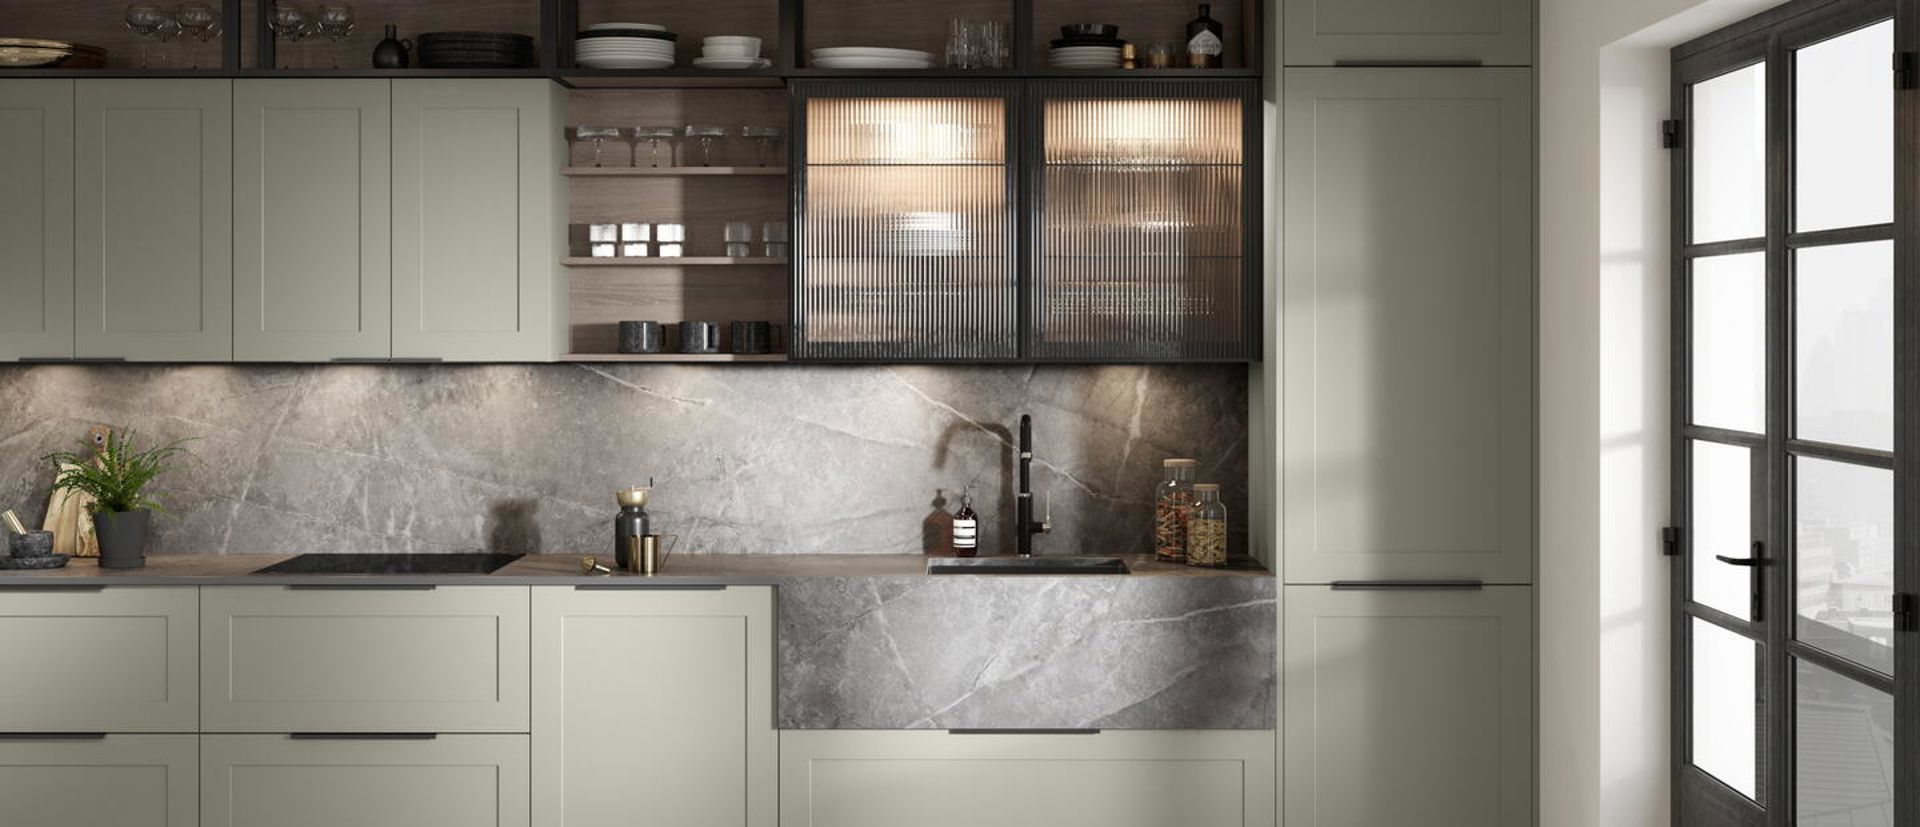 Feature Glazed Kitchens Collection